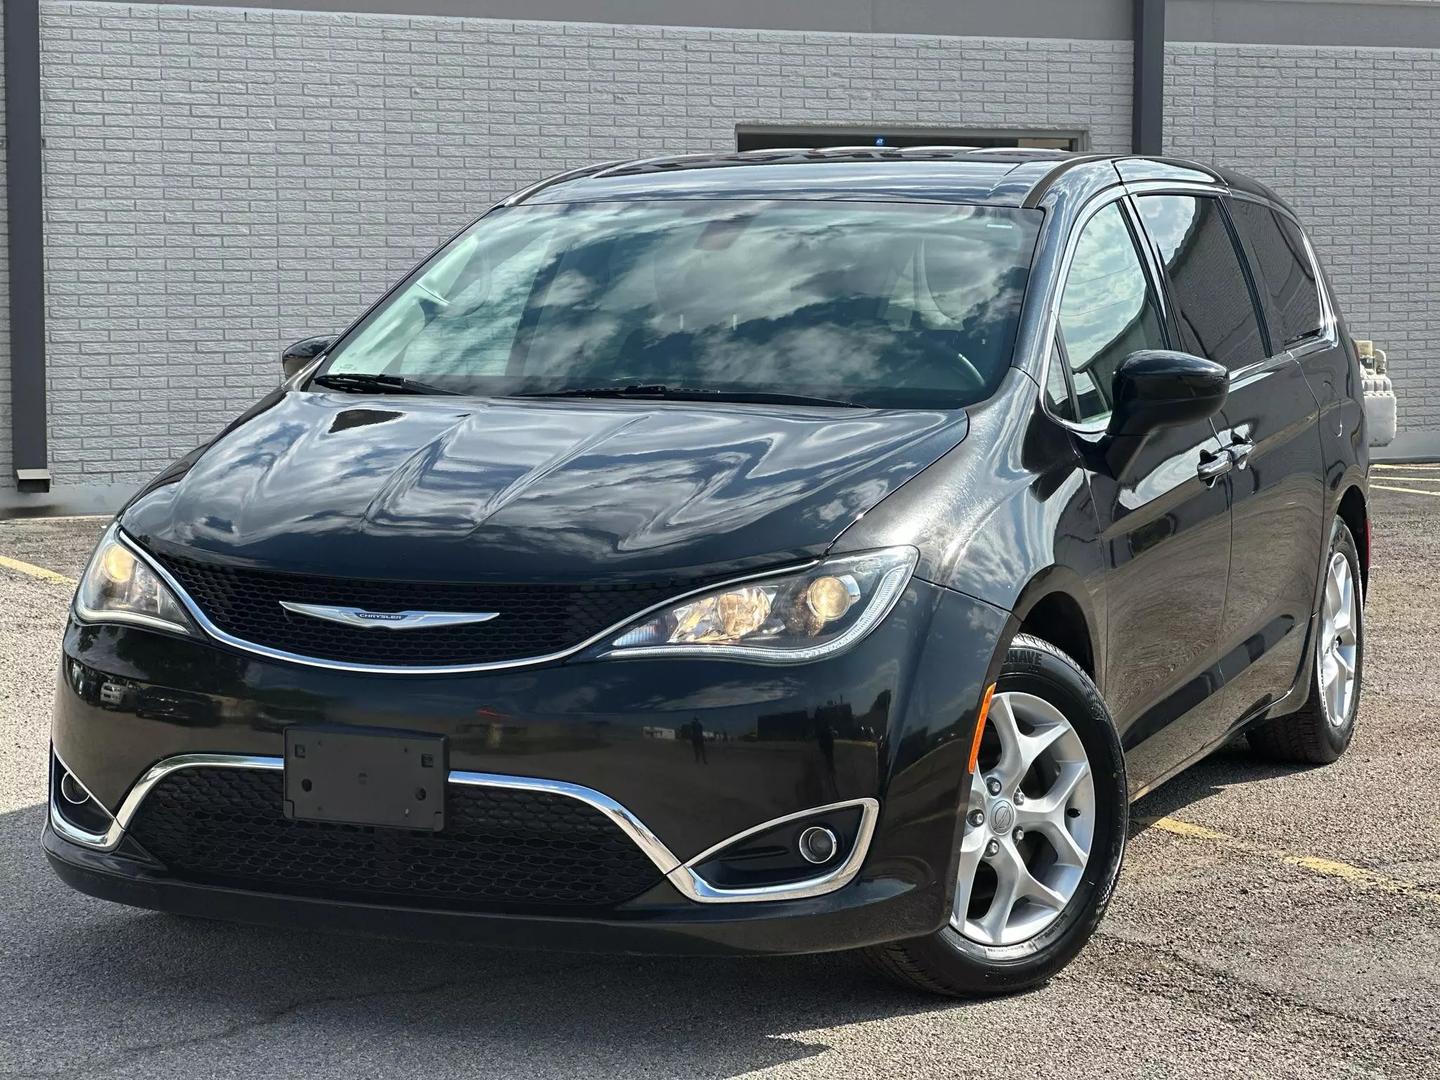 2017 Chrysler Pacifica - Image 2